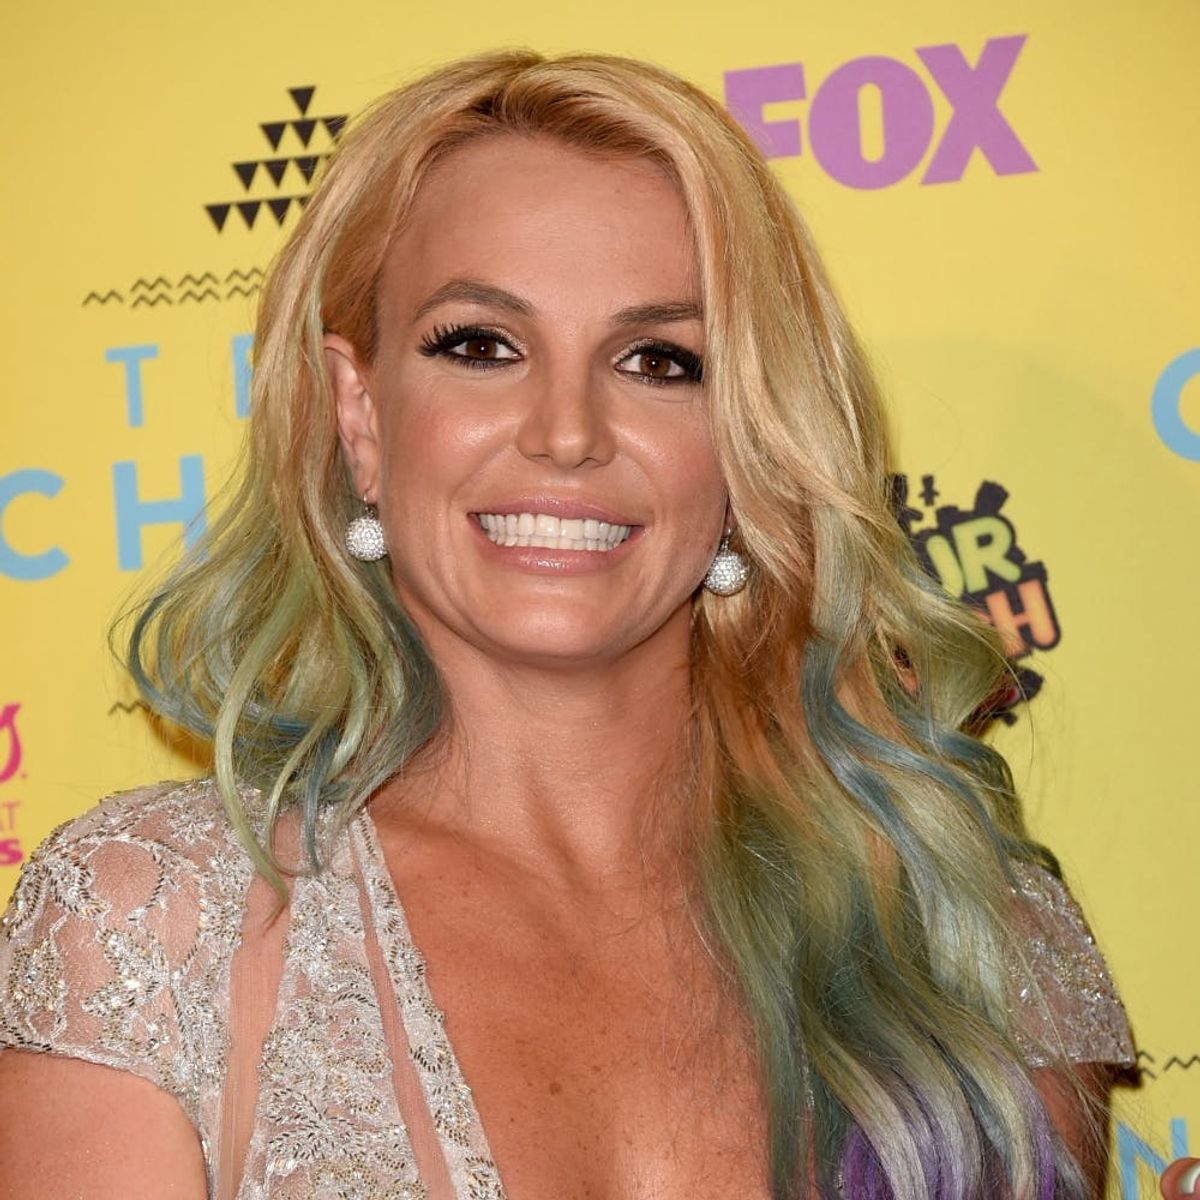 Britney Spears Is Totally Twinning With Another Pop Star on Her New Album Cover